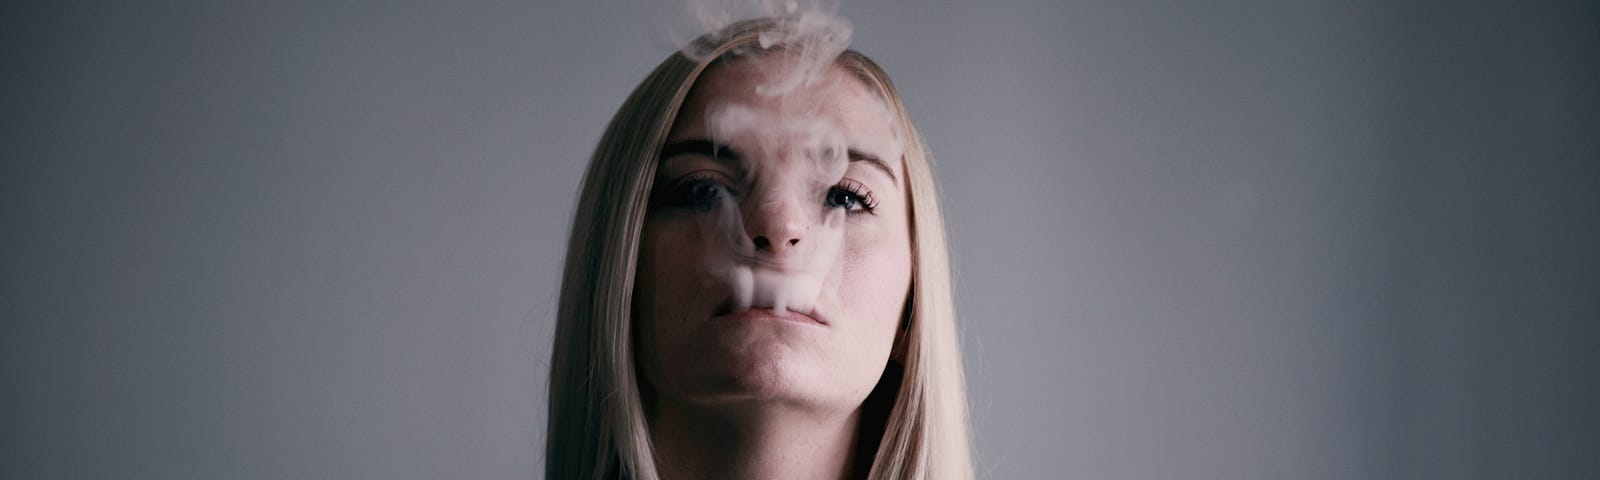 A girl with blonde hair with smoke coming out of her mouth